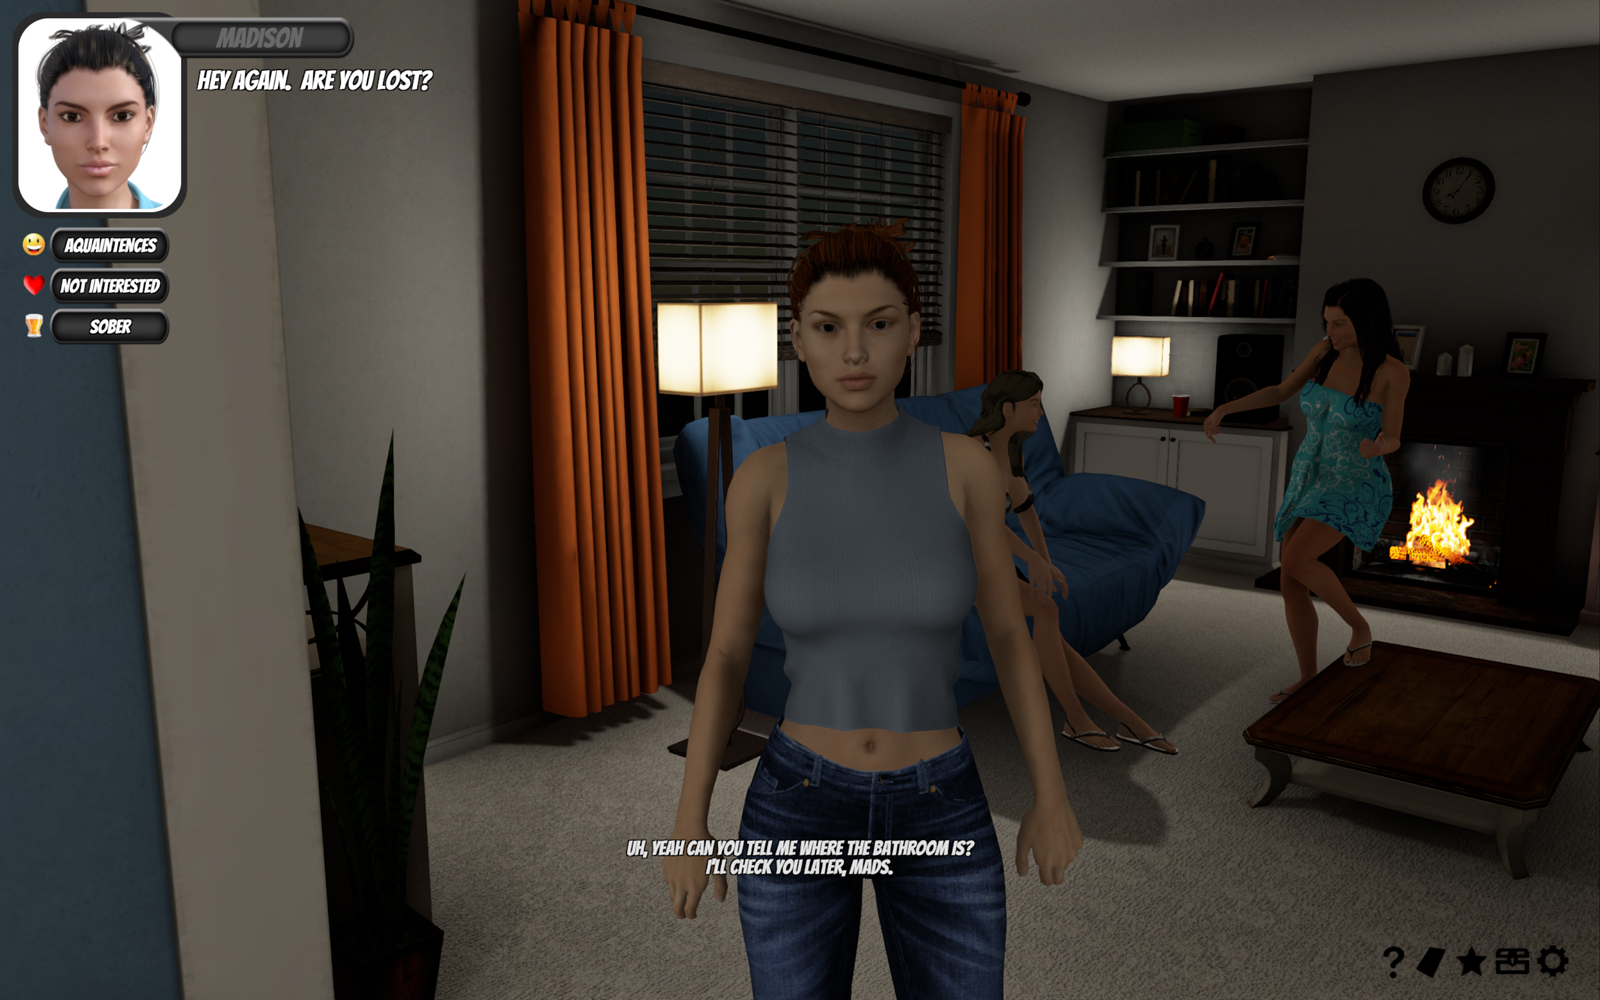 house party nudity mod